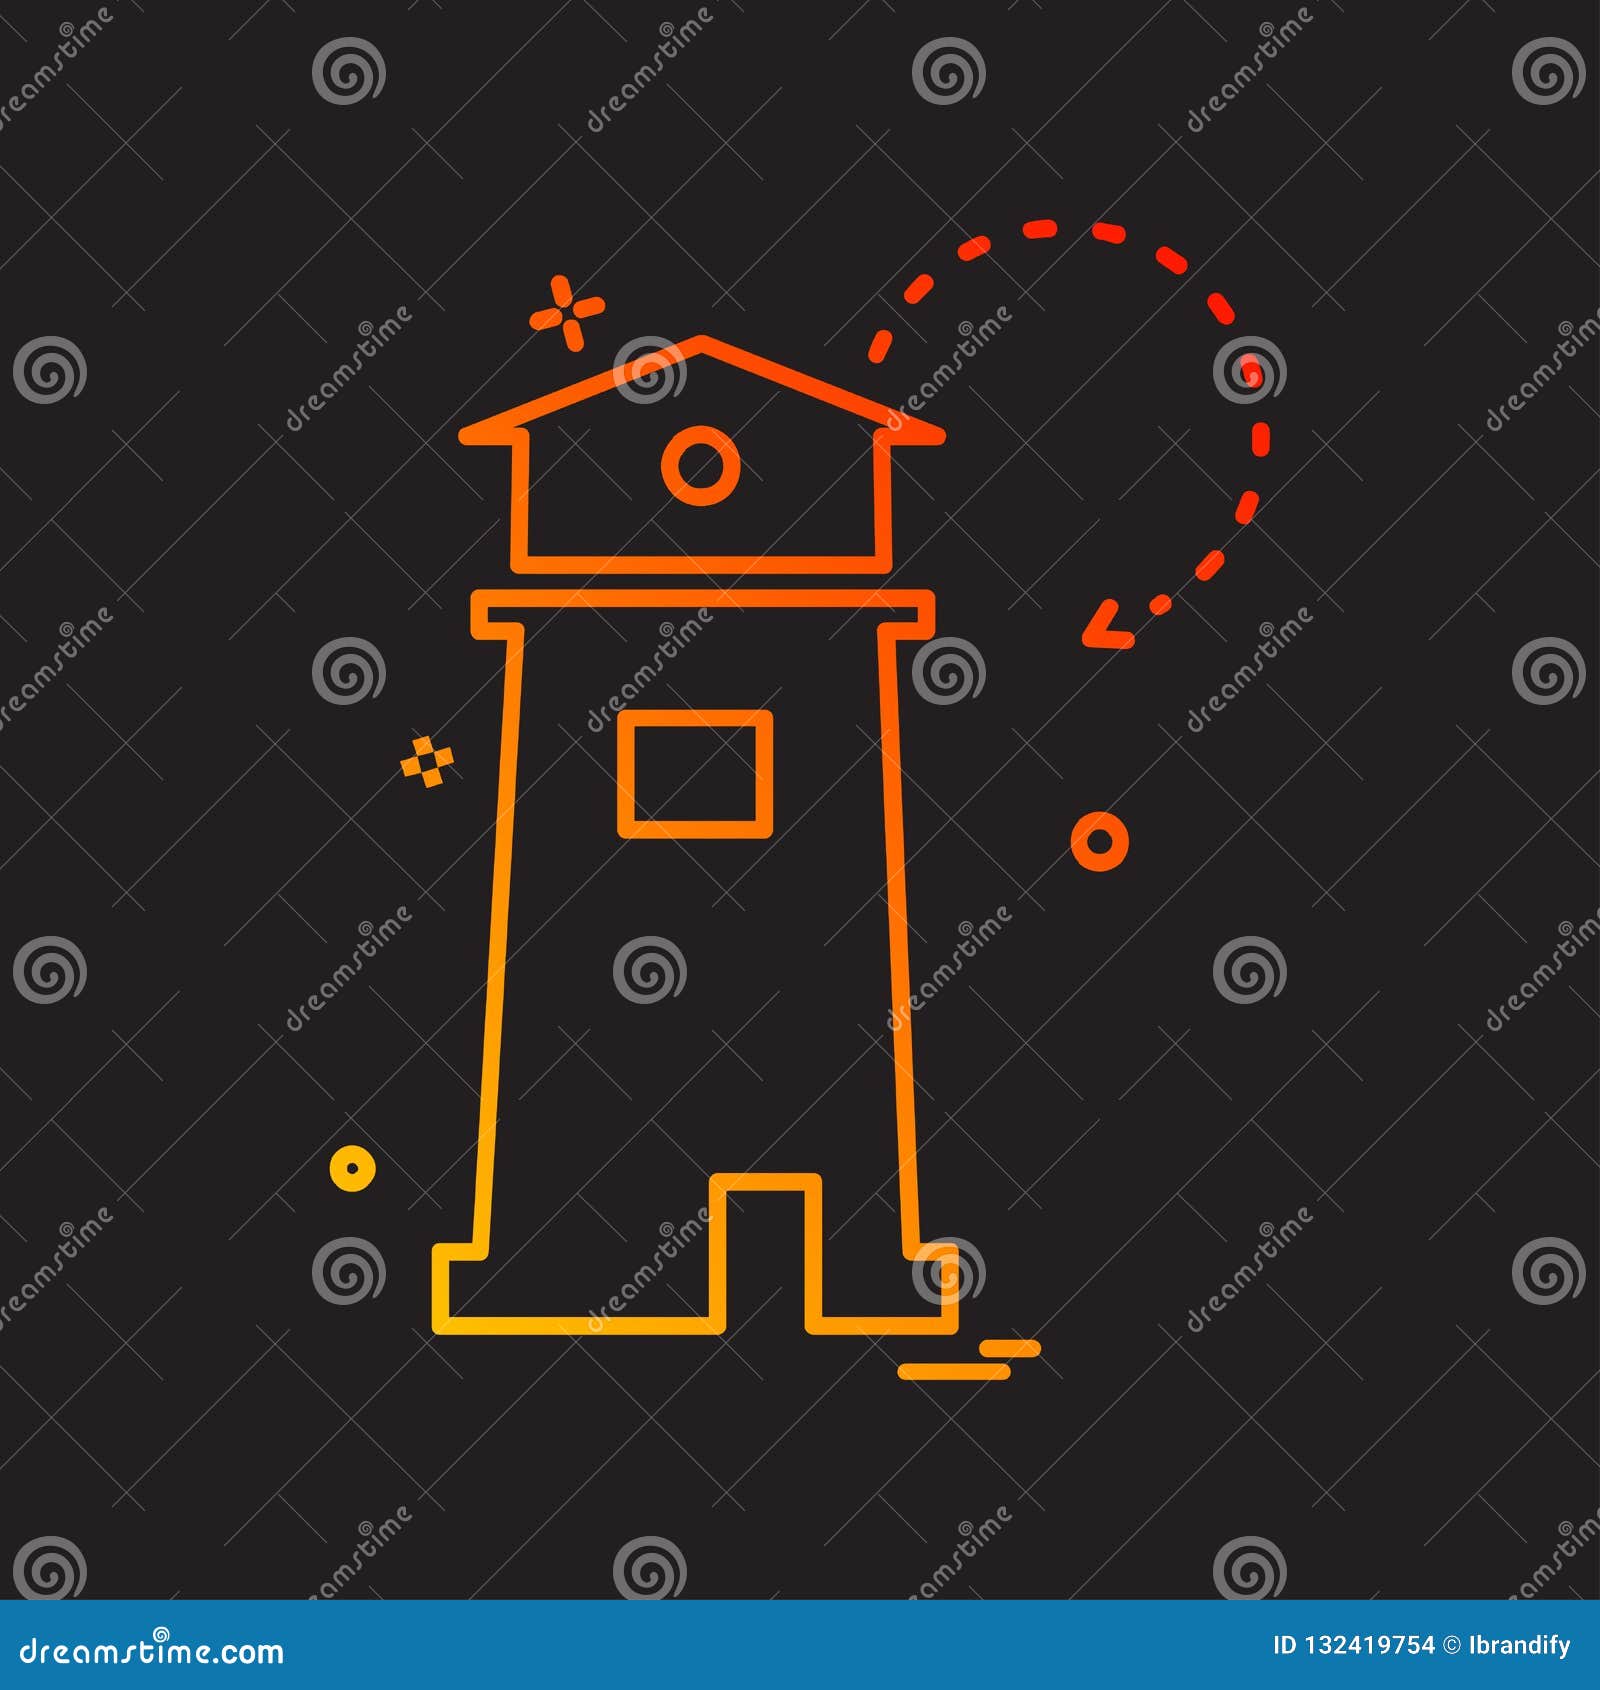 Light House Icon Design Vector Stock Vector - Illustration of business